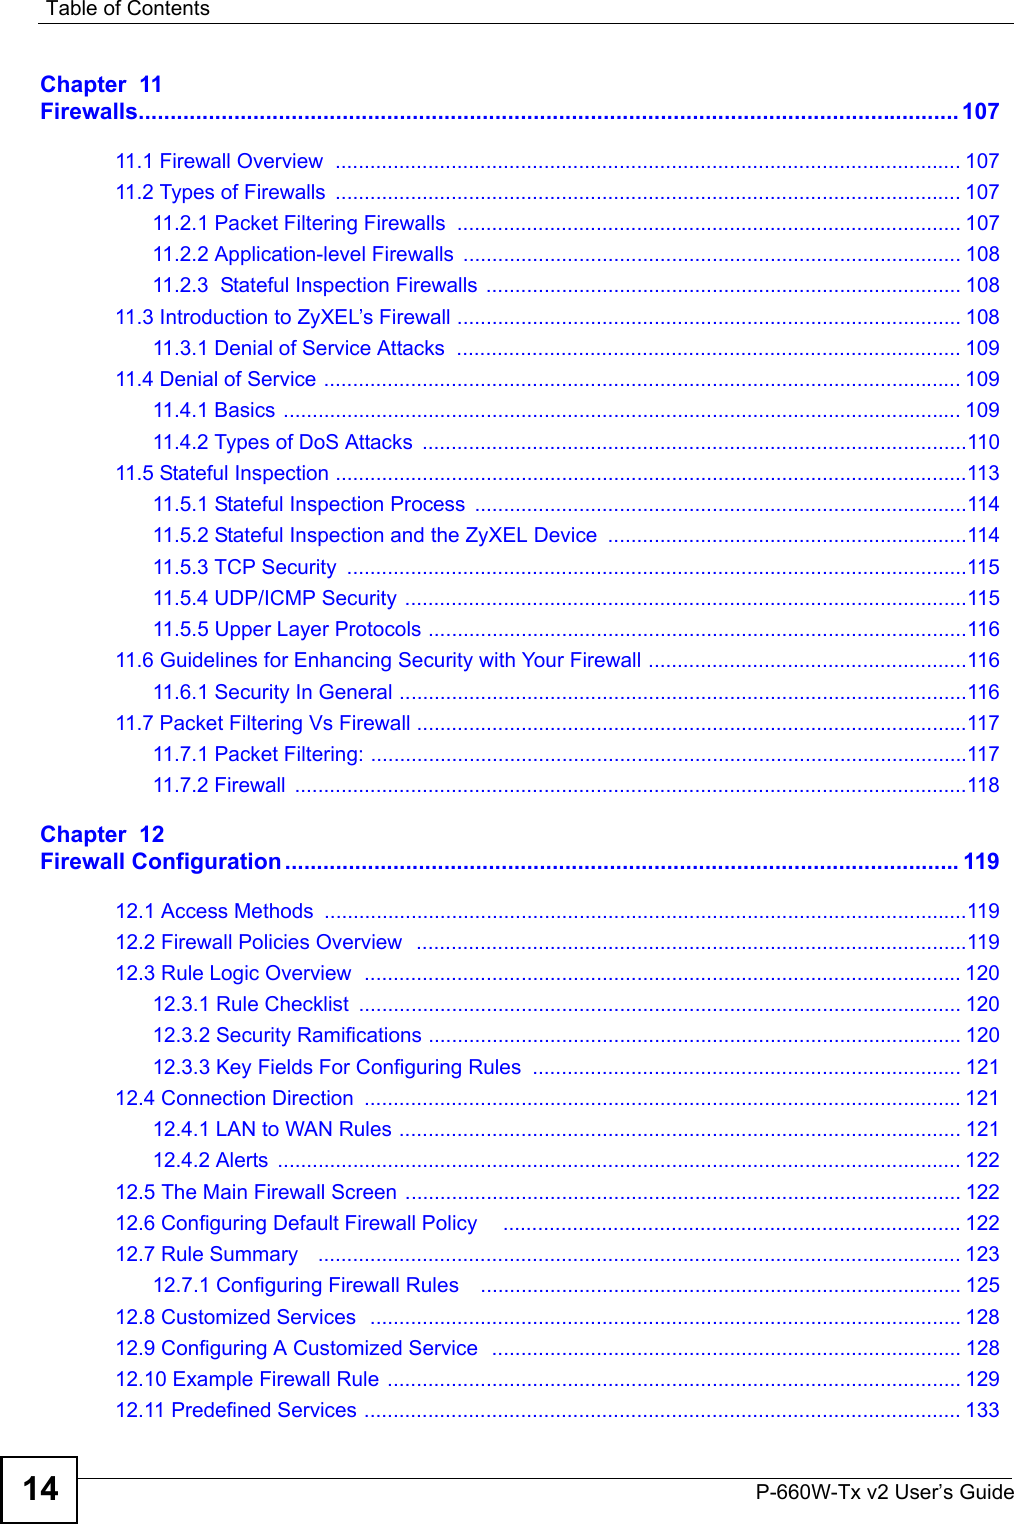 Table of ContentsP-660W-Tx v2 User’s Guide14Chapter  11Firewalls................................................................................................................................. 10711.1 Firewall Overview  ............................................................................................................ 10711.2 Types of Firewalls  ............................................................................................................ 10711.2.1 Packet Filtering Firewalls ....................................................................................... 10711.2.2 Application-level Firewalls ...................................................................................... 10811.2.3  Stateful Inspection Firewalls .................................................................................. 10811.3 Introduction to ZyXEL’s Firewall ....................................................................................... 10811.3.1 Denial of Service Attacks  ....................................................................................... 10911.4 Denial of Service .............................................................................................................. 10911.4.1 Basics ..................................................................................................................... 10911.4.2 Types of DoS Attacks  ..............................................................................................11011.5 Stateful Inspection .............................................................................................................11311.5.1 Stateful Inspection Process .....................................................................................11411.5.2 Stateful Inspection and the ZyXEL Device ..............................................................11411.5.3 TCP Security  ...........................................................................................................11511.5.4 UDP/ICMP Security .................................................................................................11511.5.5 Upper Layer Protocols .............................................................................................11611.6 Guidelines for Enhancing Security with Your Firewall .......................................................11611.6.1 Security In General ..................................................................................................11611.7 Packet Filtering Vs Firewall ...............................................................................................11711.7.1 Packet Filtering: .......................................................................................................11711.7.2 Firewall  ....................................................................................................................118Chapter  12Firewall Configuration ..........................................................................................................11912.1 Access Methods  ...............................................................................................................11912.2 Firewall Policies Overview   ...............................................................................................11912.3 Rule Logic Overview  ....................................................................................................... 12012.3.1 Rule Checklist  ........................................................................................................ 12012.3.2 Security Ramifications ............................................................................................ 12012.3.3 Key Fields For Configuring Rules  .......................................................................... 12112.4 Connection Direction  ....................................................................................................... 12112.4.1 LAN to WAN Rules ................................................................................................. 12112.4.2 Alerts  ...................................................................................................................... 12212.5 The Main Firewall Screen ................................................................................................ 12212.6 Configuring Default Firewall Policy    ............................................................................... 12212.7 Rule Summary   ............................................................................................................... 12312.7.1 Configuring Firewall Rules    ................................................................................... 12512.8 Customized Services   ......................................................................................................12812.9 Configuring A Customized Service  ................................................................................. 12812.10 Example Firewall Rule ................................................................................................... 12912.11 Predefined Services ....................................................................................................... 133